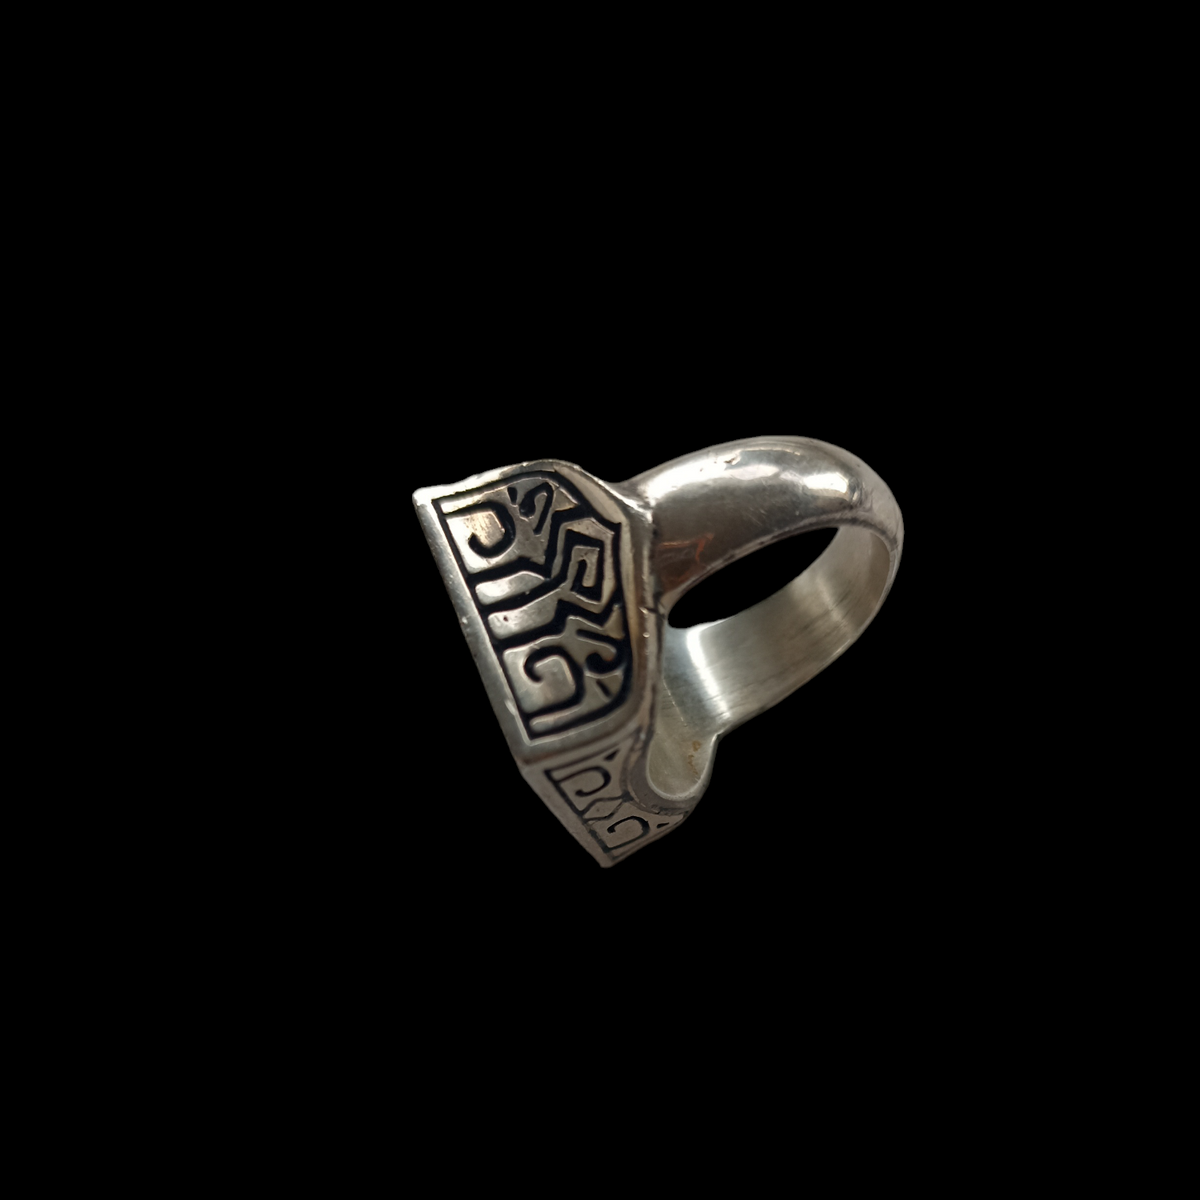 Handcrafted ring from Iran